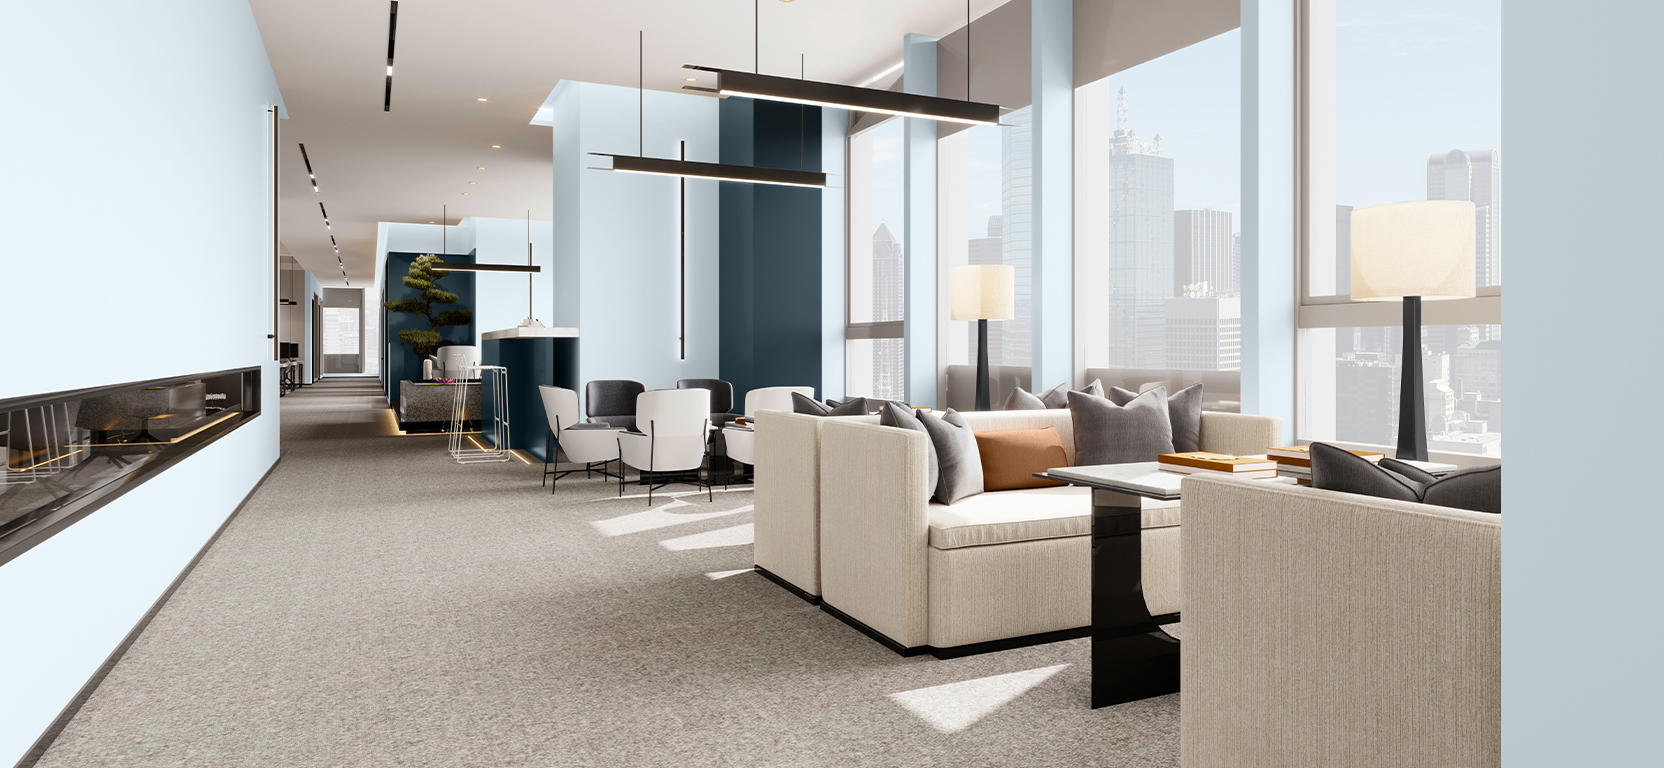 Urban interior with comfortable beige seating, floor-to-ceiling windows overlooking cityscape, light and dark blue color scheme with gray and black hardware and accessories.